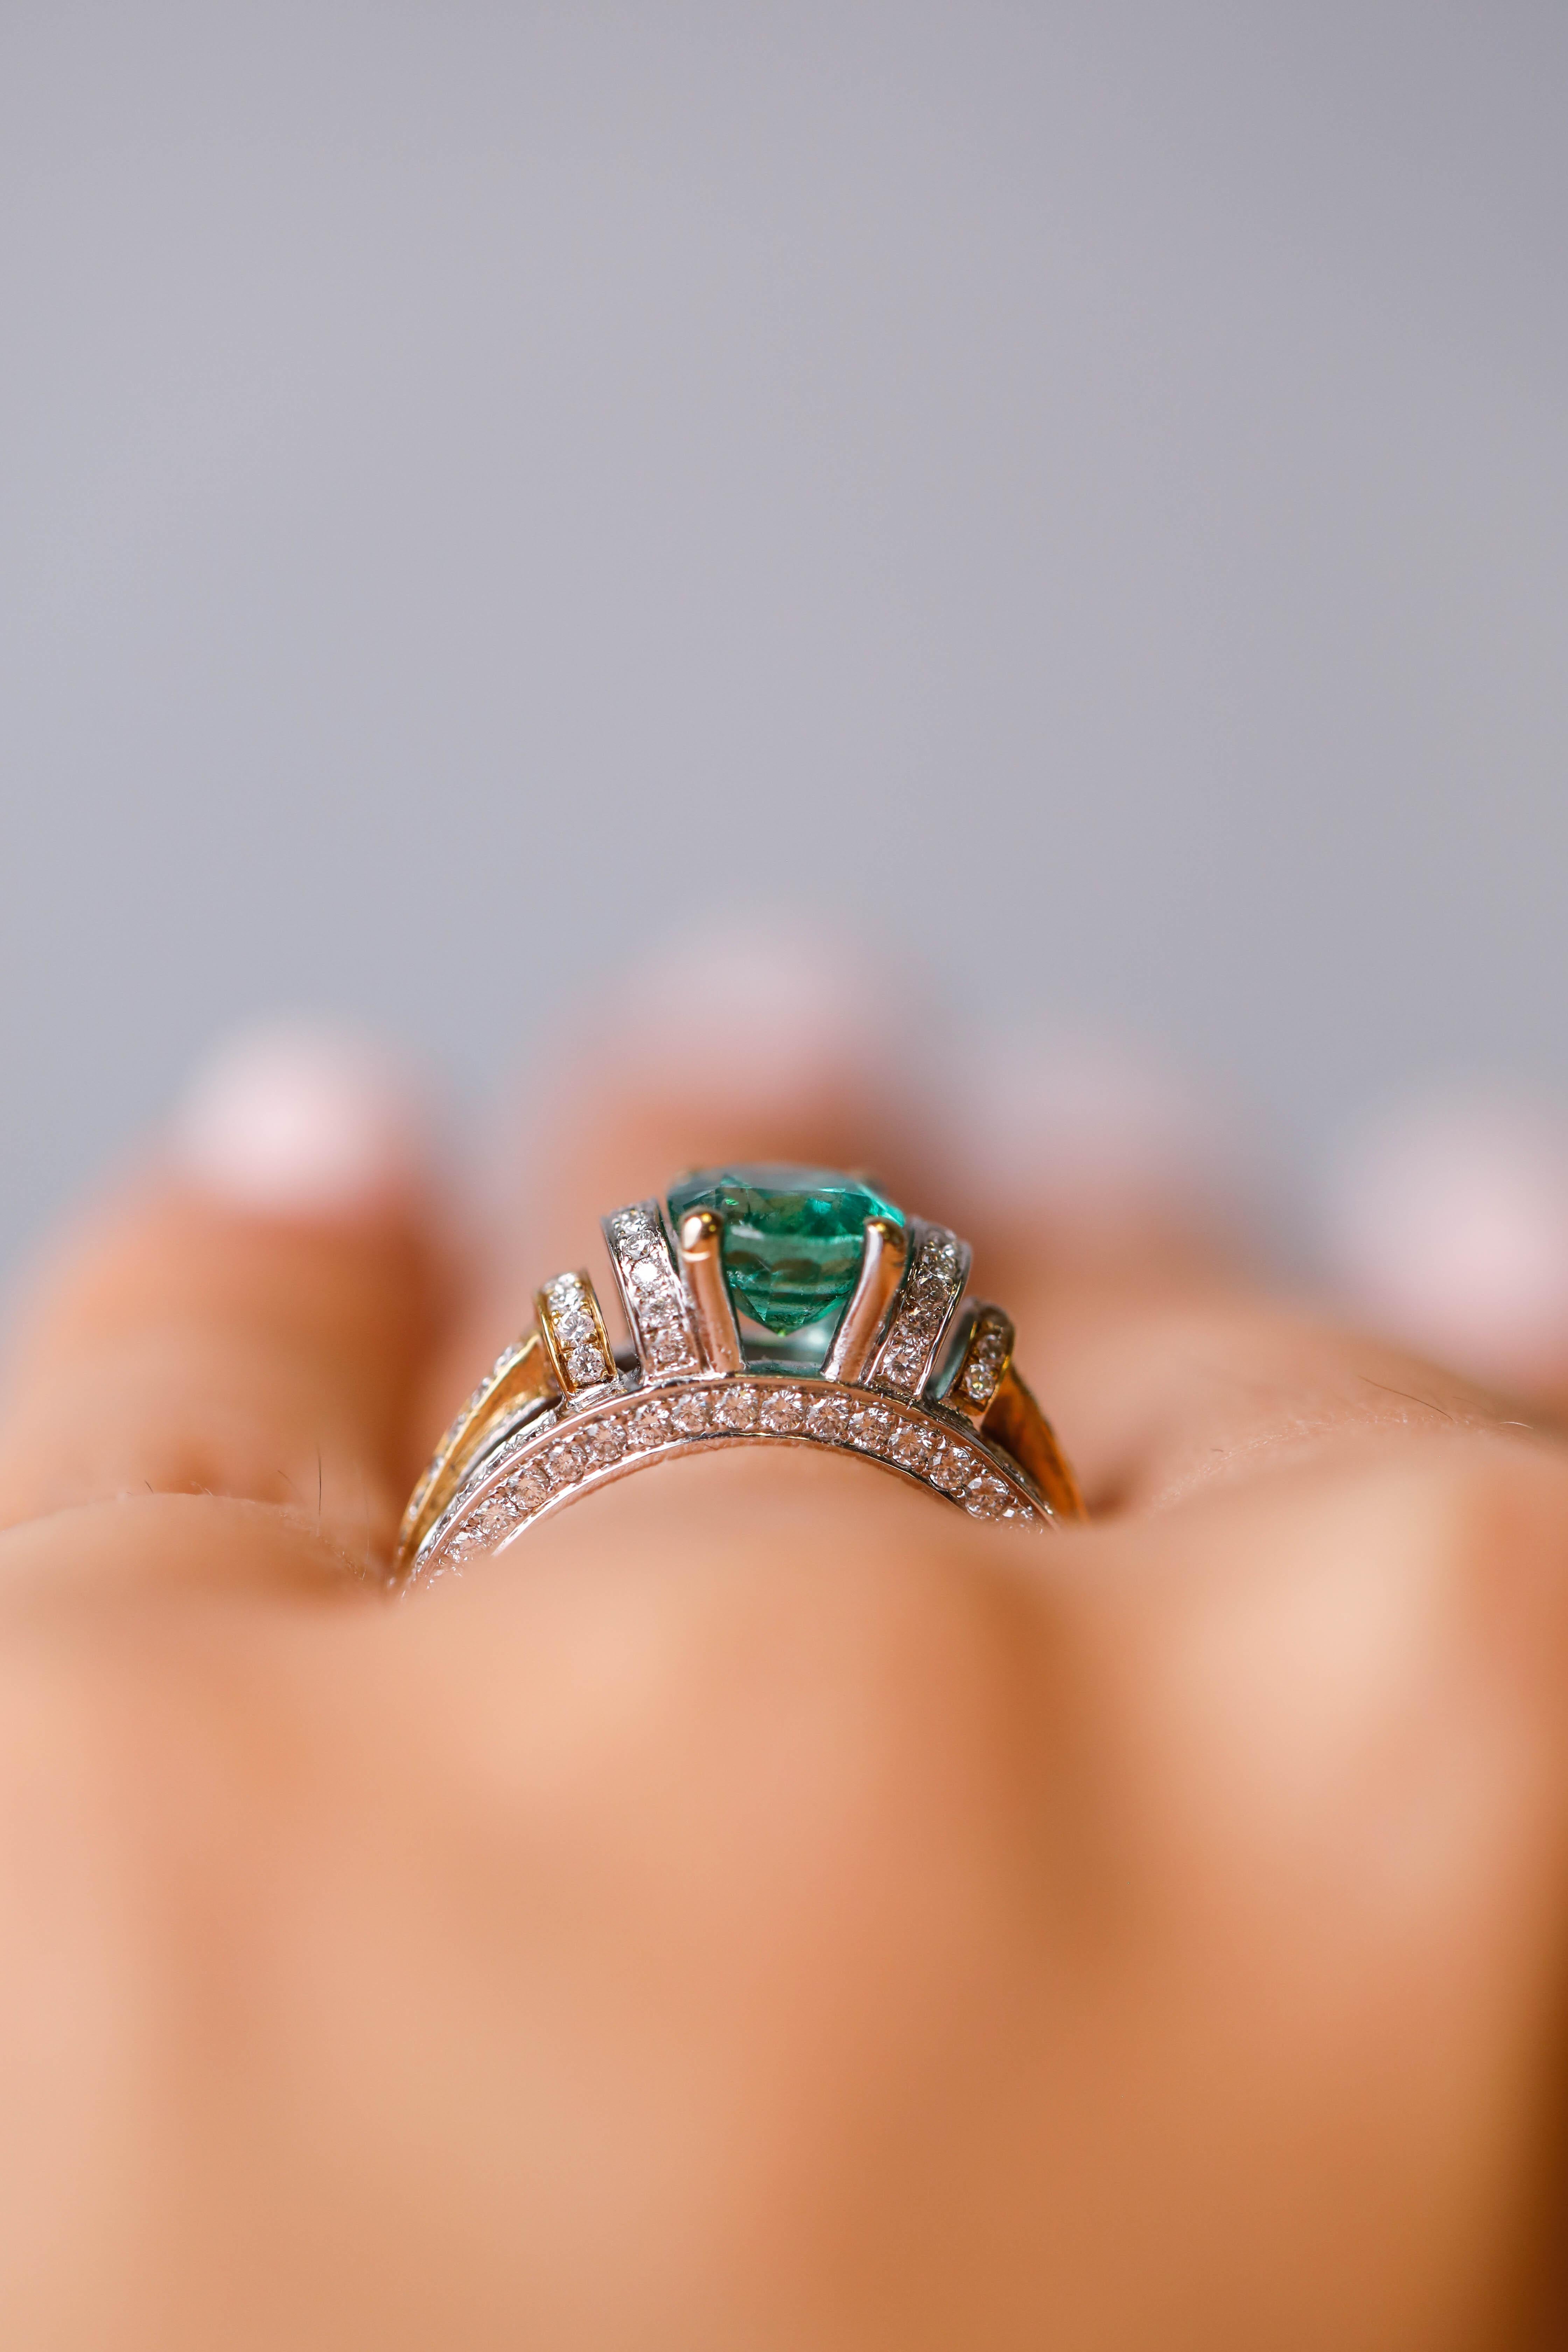 Oval Cut Natalie K 1.30 Carat Oval Emerald Ring Diamond Engagement in 18 Kt Two-Tone Gold